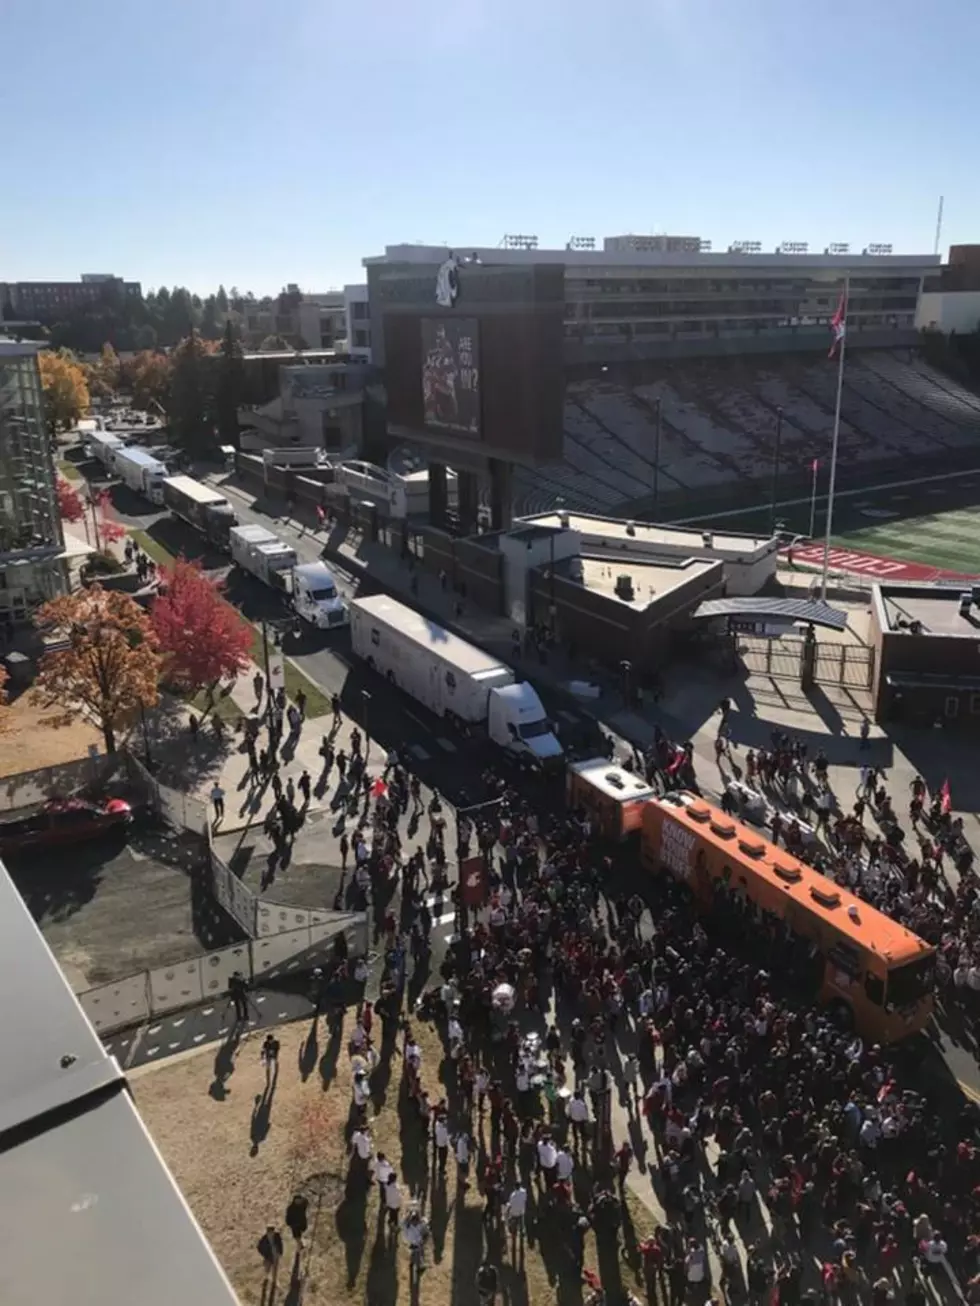 ESPN College Game Day Has Arrived In Pullman!